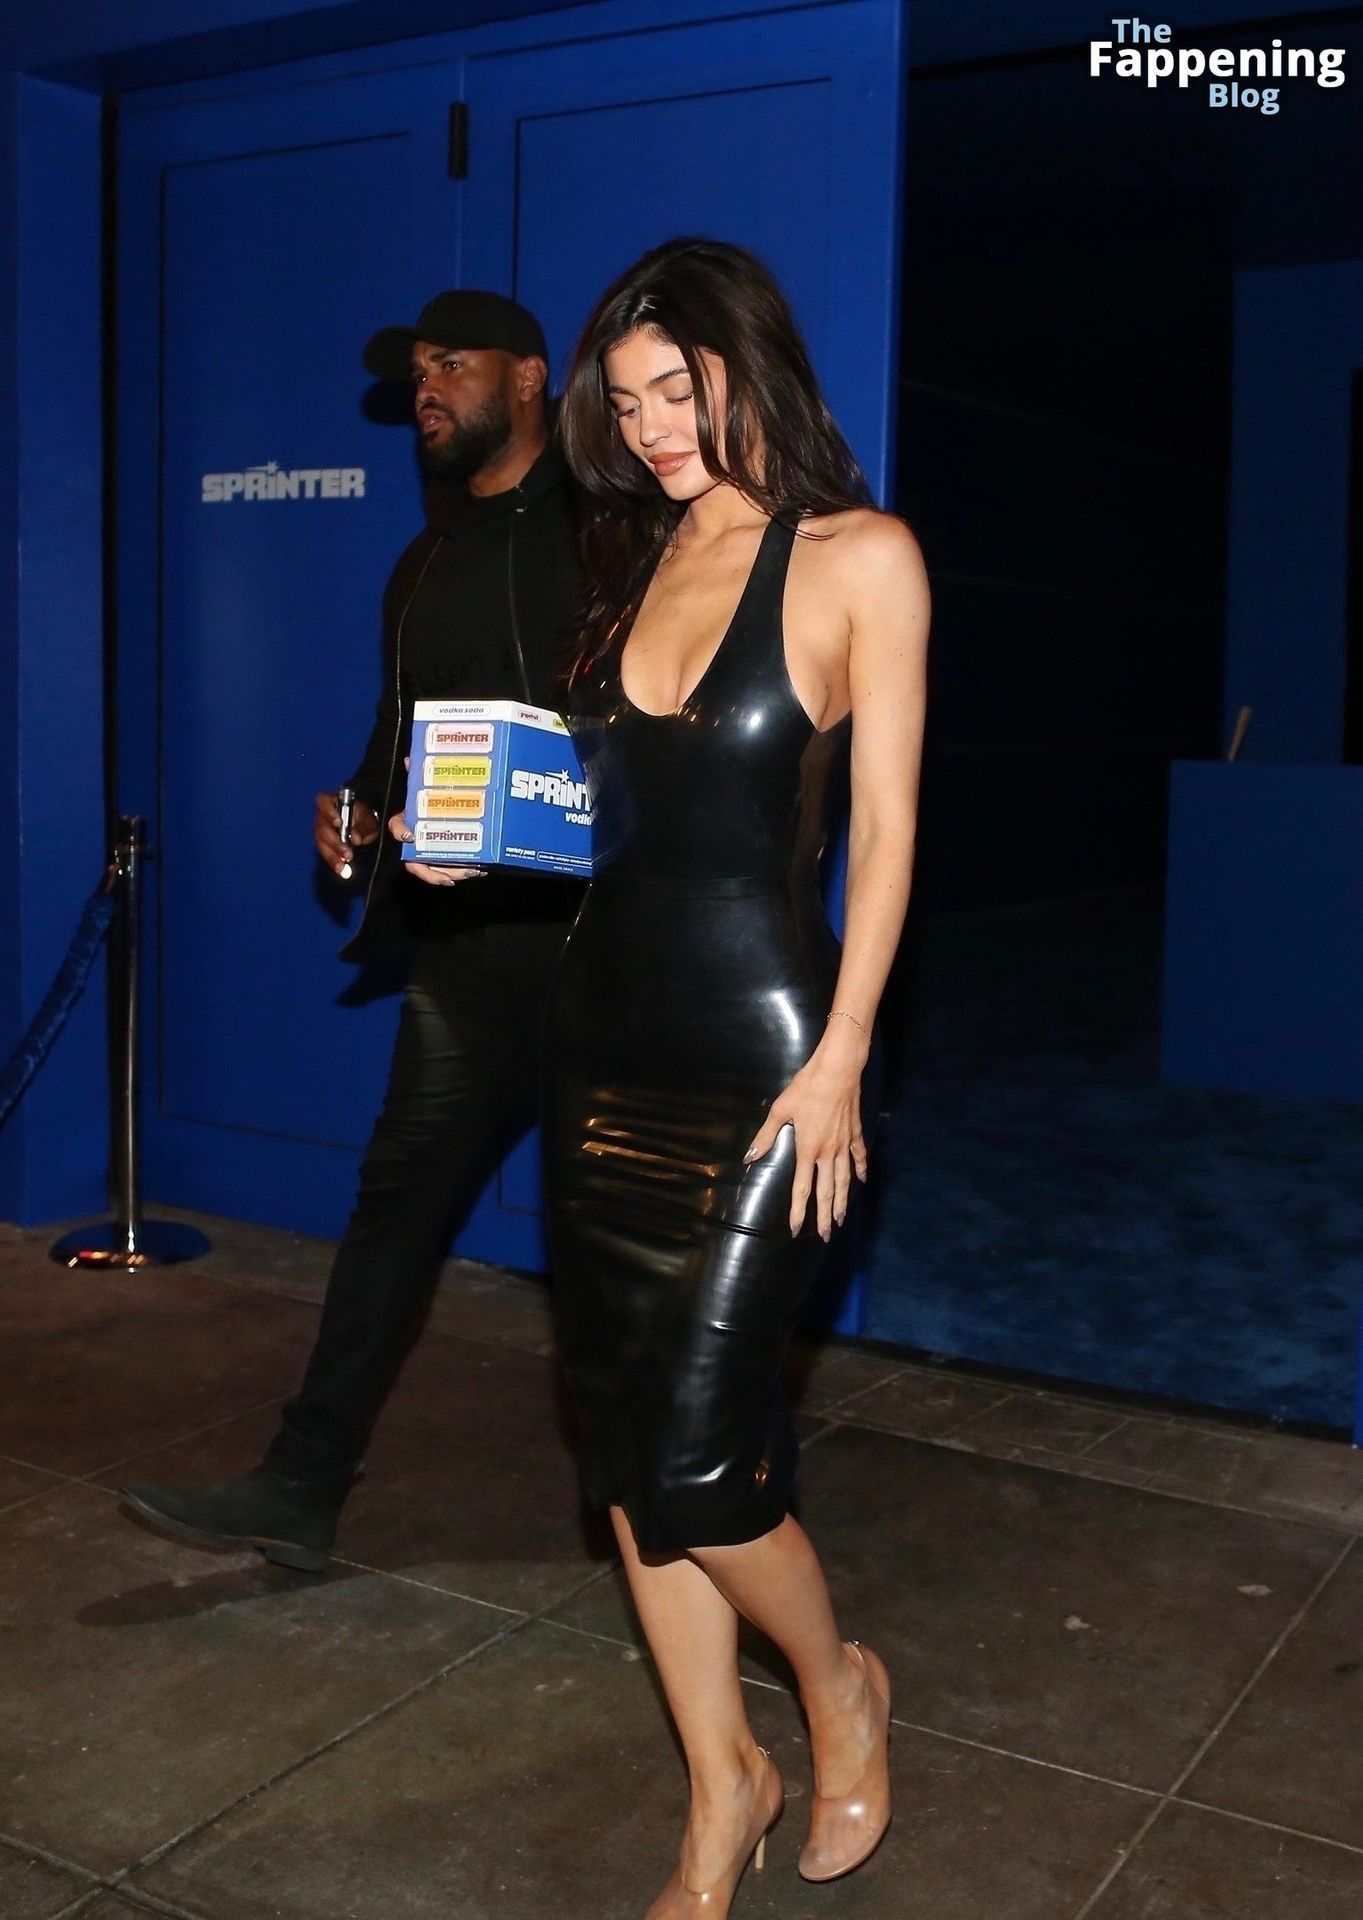 kylie-jenner-sexy-dress-cleavage-sprinter-soda-launch-20-thefappeningblog.com_.jpg